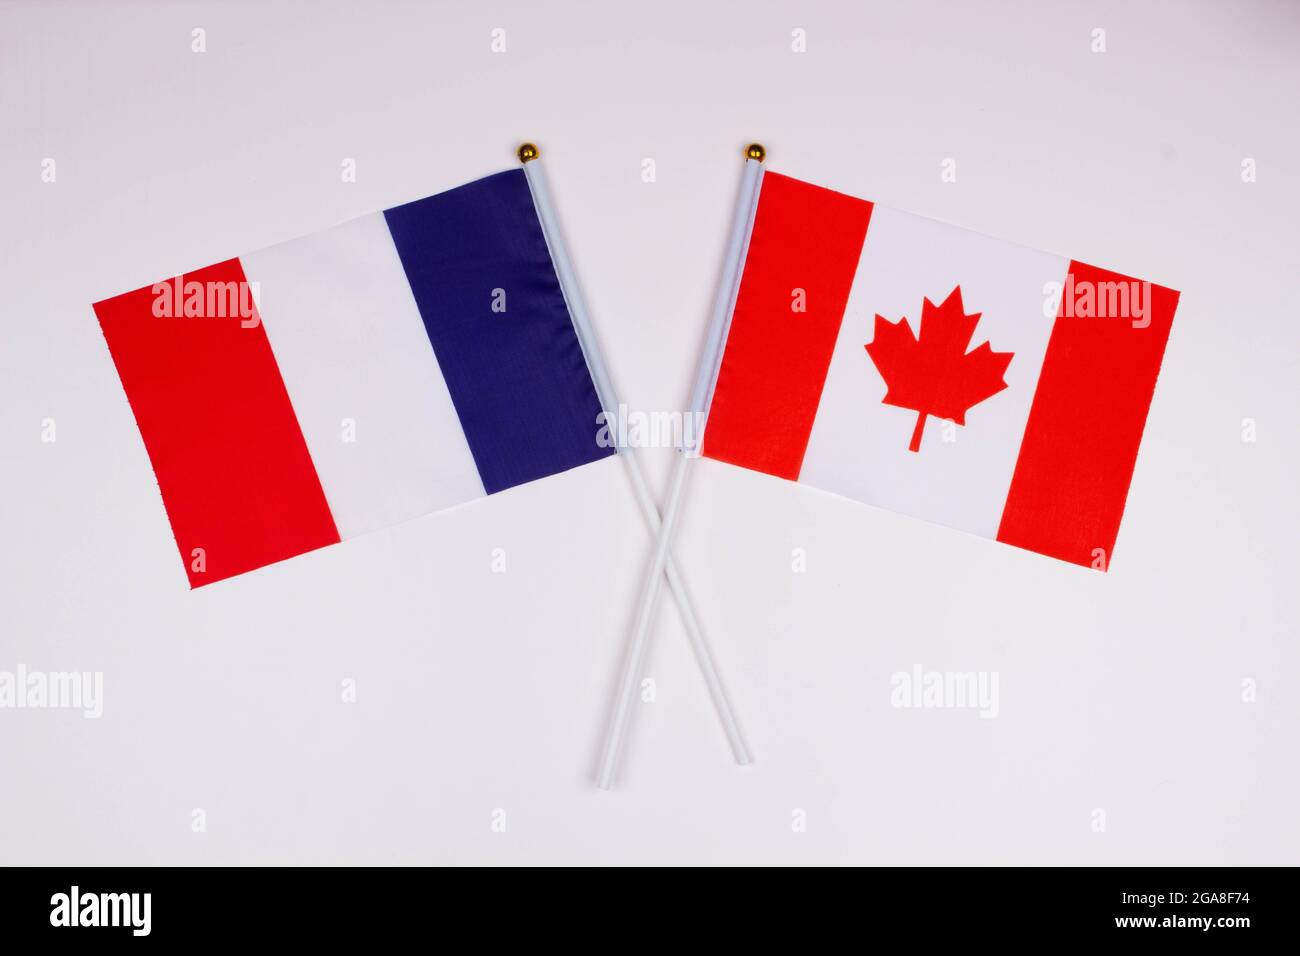 Flag of France and flag of Canada crossed with each other on a white background. Isolated. The image illustrates the relationship between countries Stock Photo